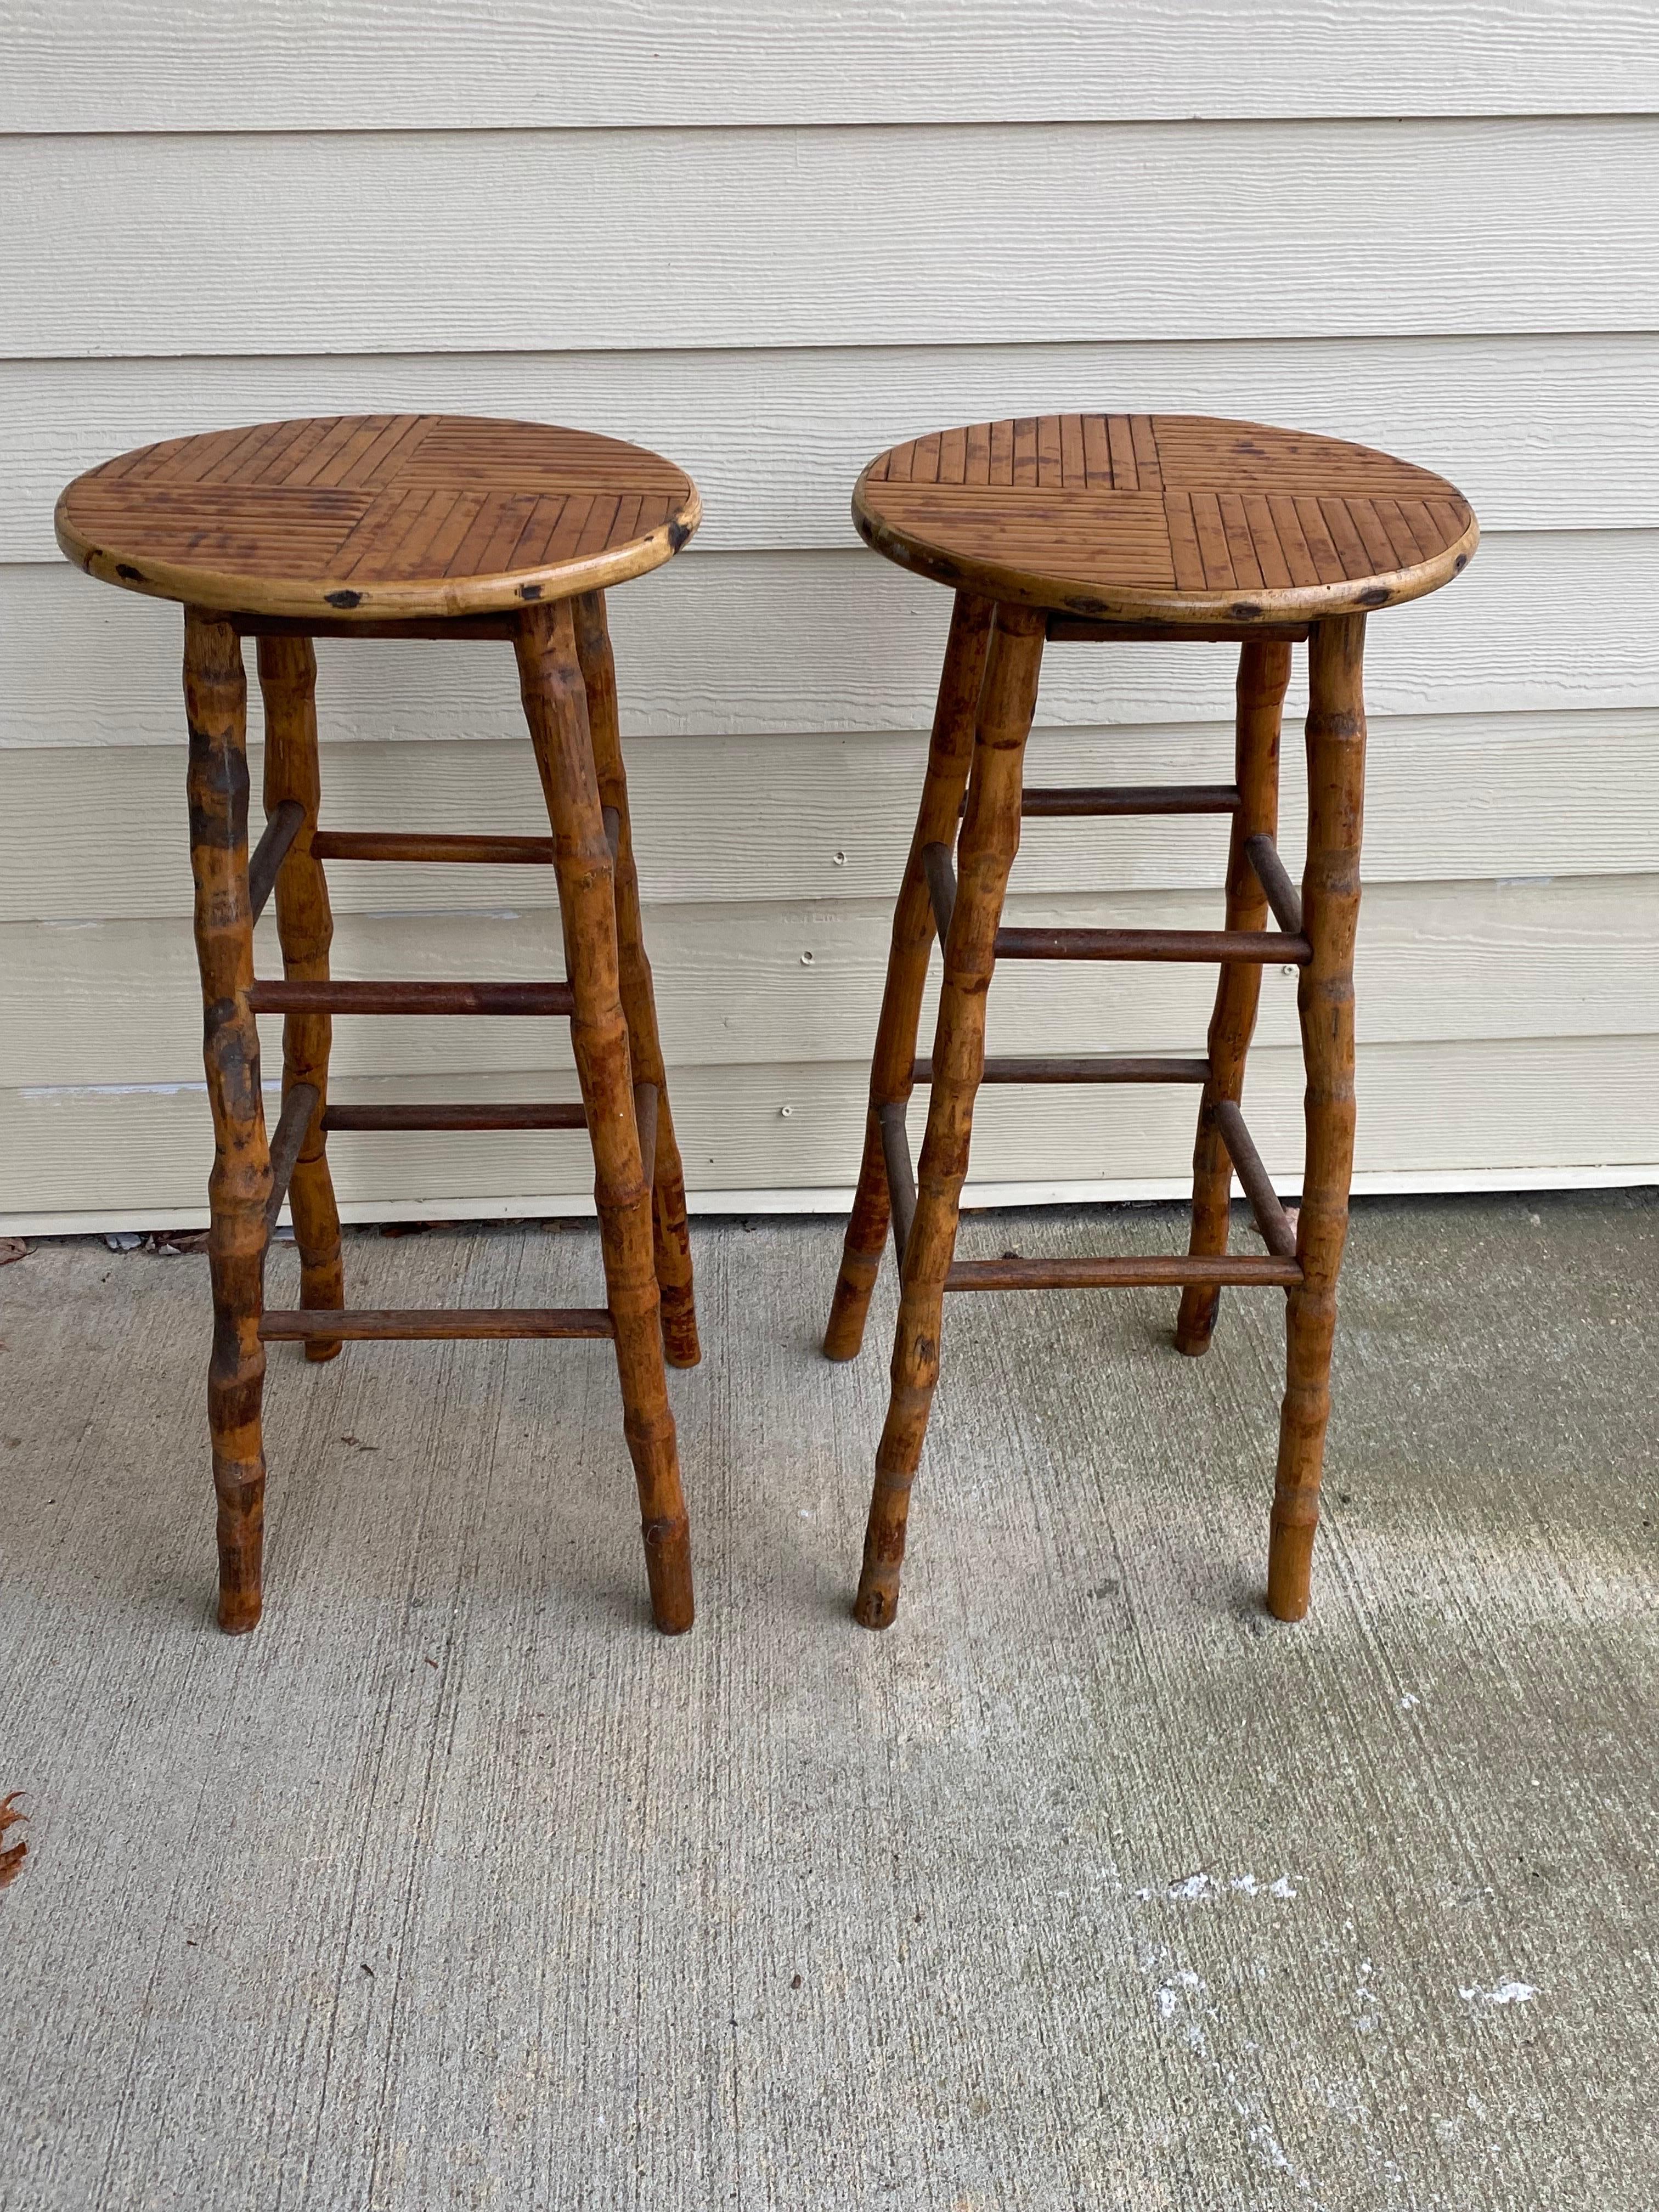 Mid-century Bamboo Bar Stools
Solid bamboo stools in tortoise shell finish with parquet design seat for bar height use.
Overall good condition. Age and wear consistent with age and use.

14.5